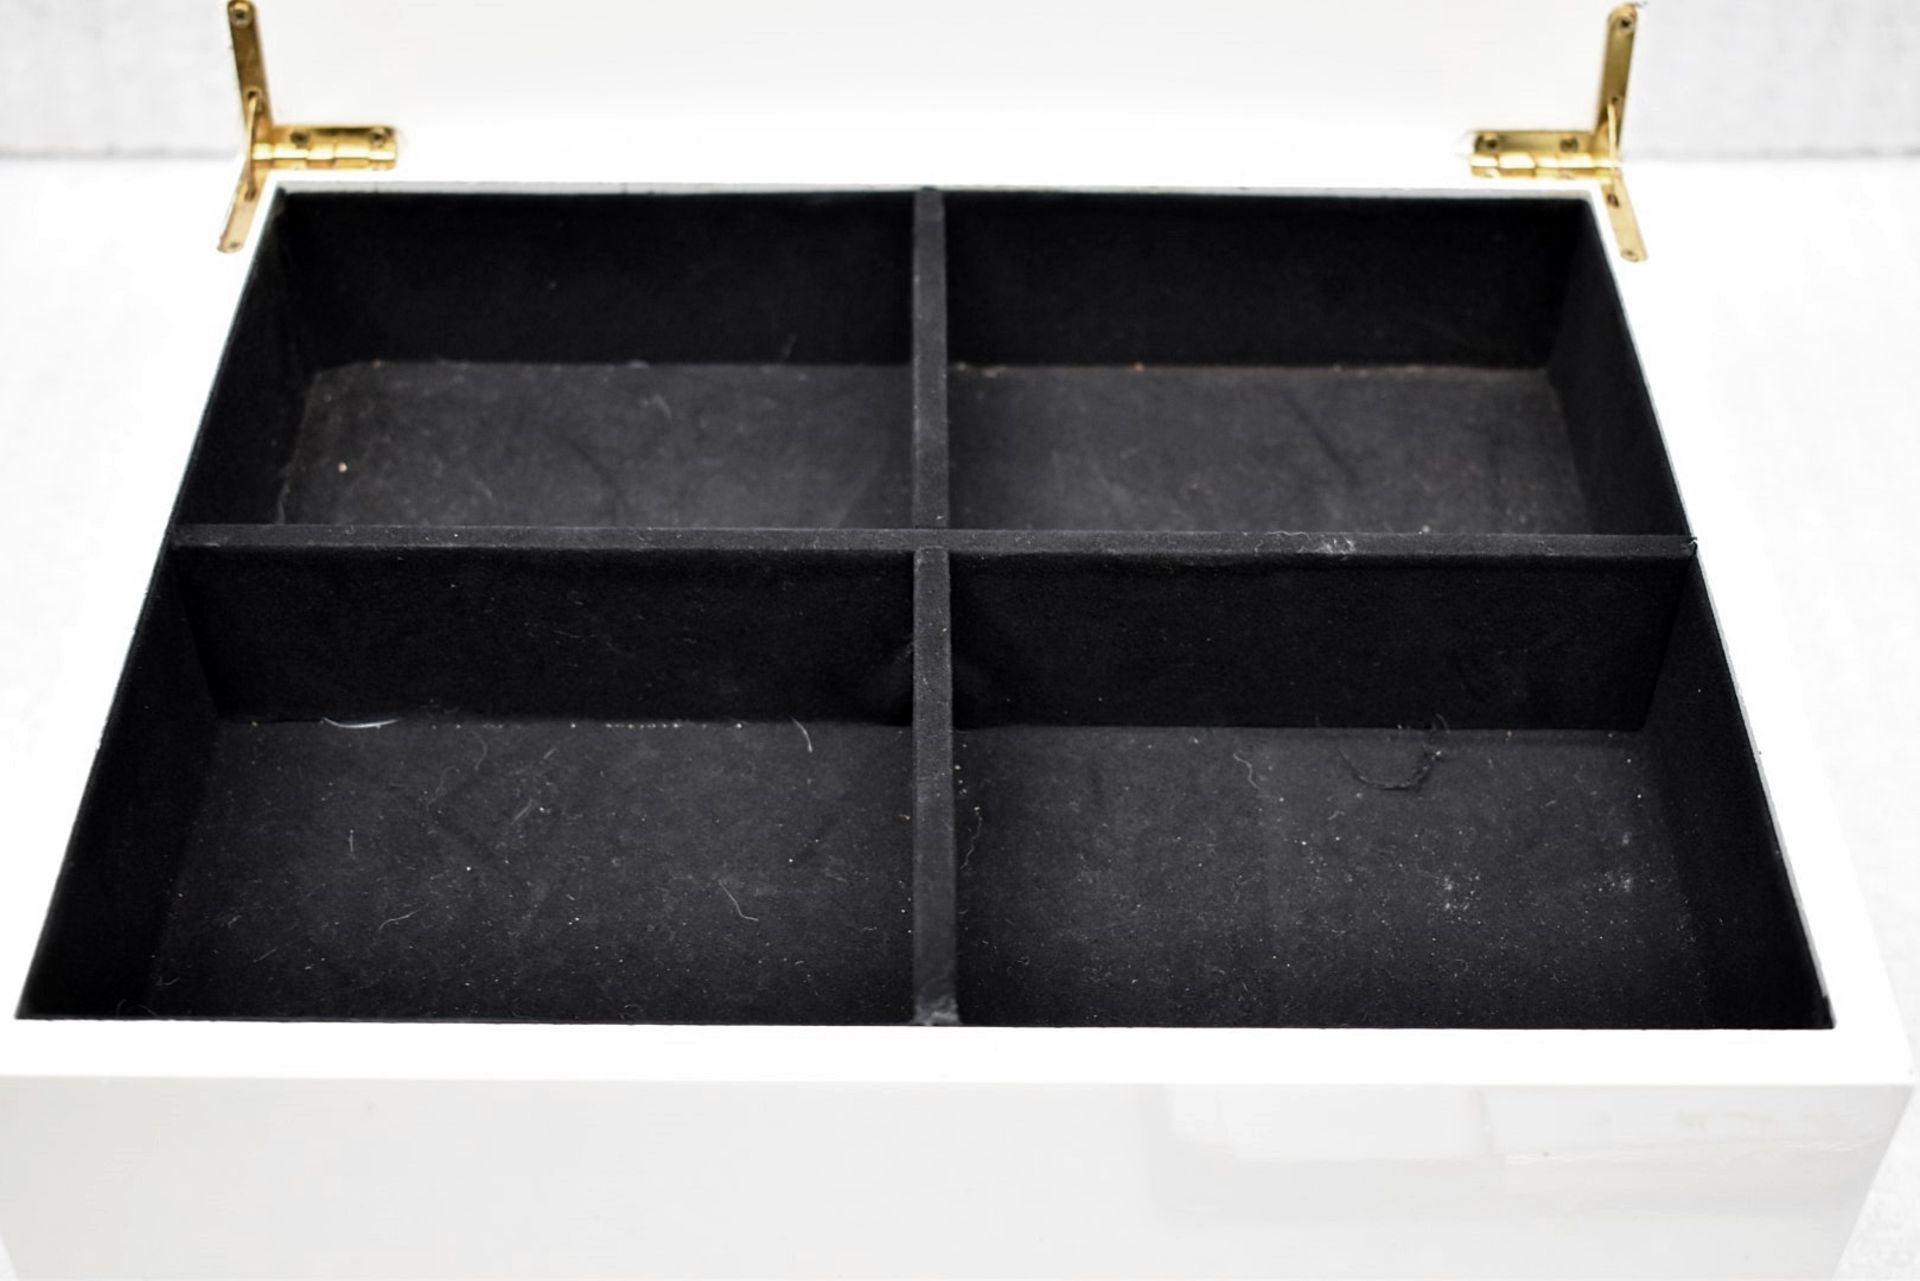 1 x Designer-style Jewellery Box In Cream With Statement Handle - Ref: CNT761/WH2/C23 - CL845 - NO - Image 4 of 4